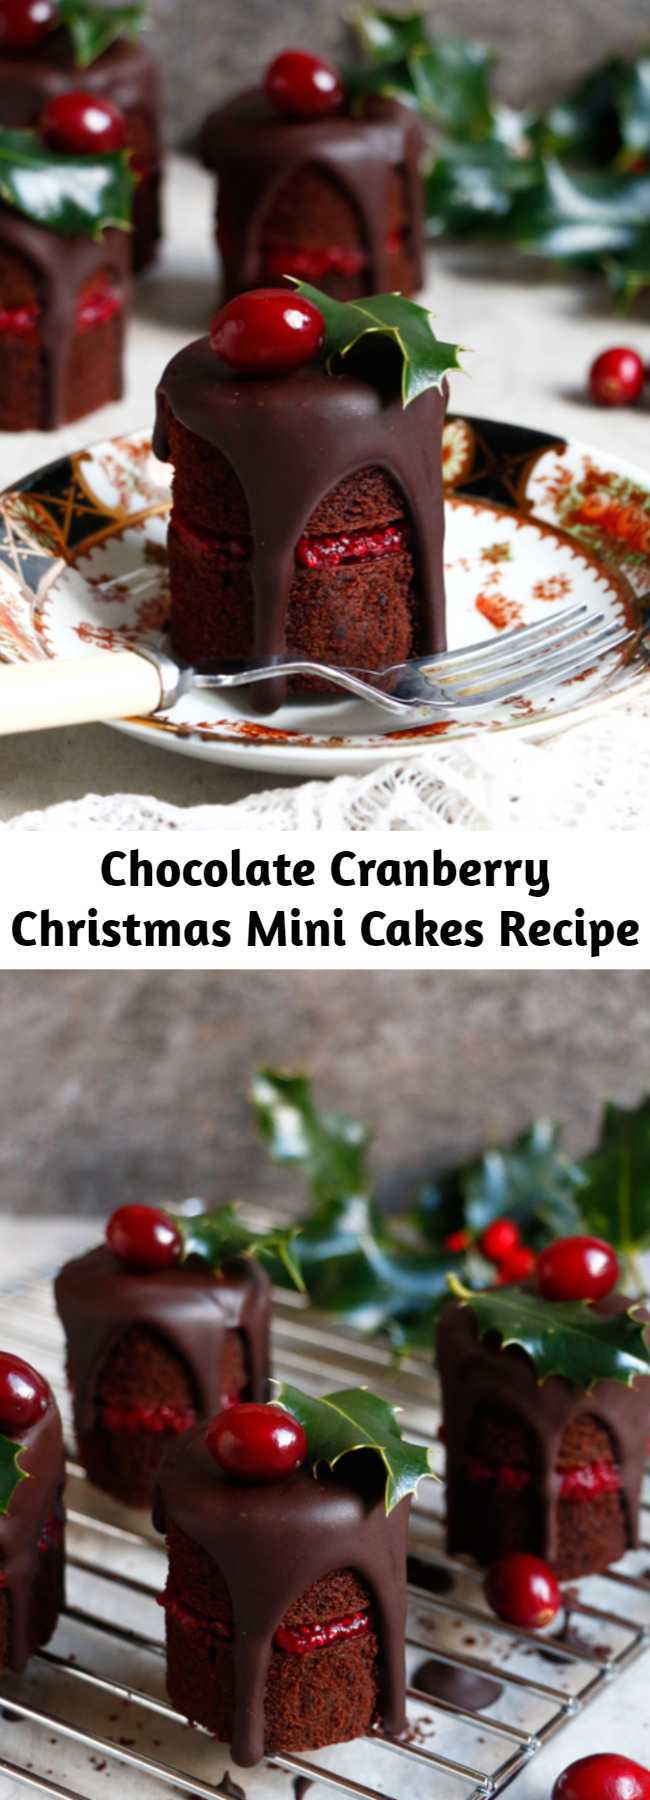 Chocolate Cranberry Christmas Mini Cakes Recipe - Chocolate Cranberry Christmas Mini Cakes Recipe. Vegan, gluten-free and nut-free wholesome chocolate mini cakes filled with quick cranberry chia jam.